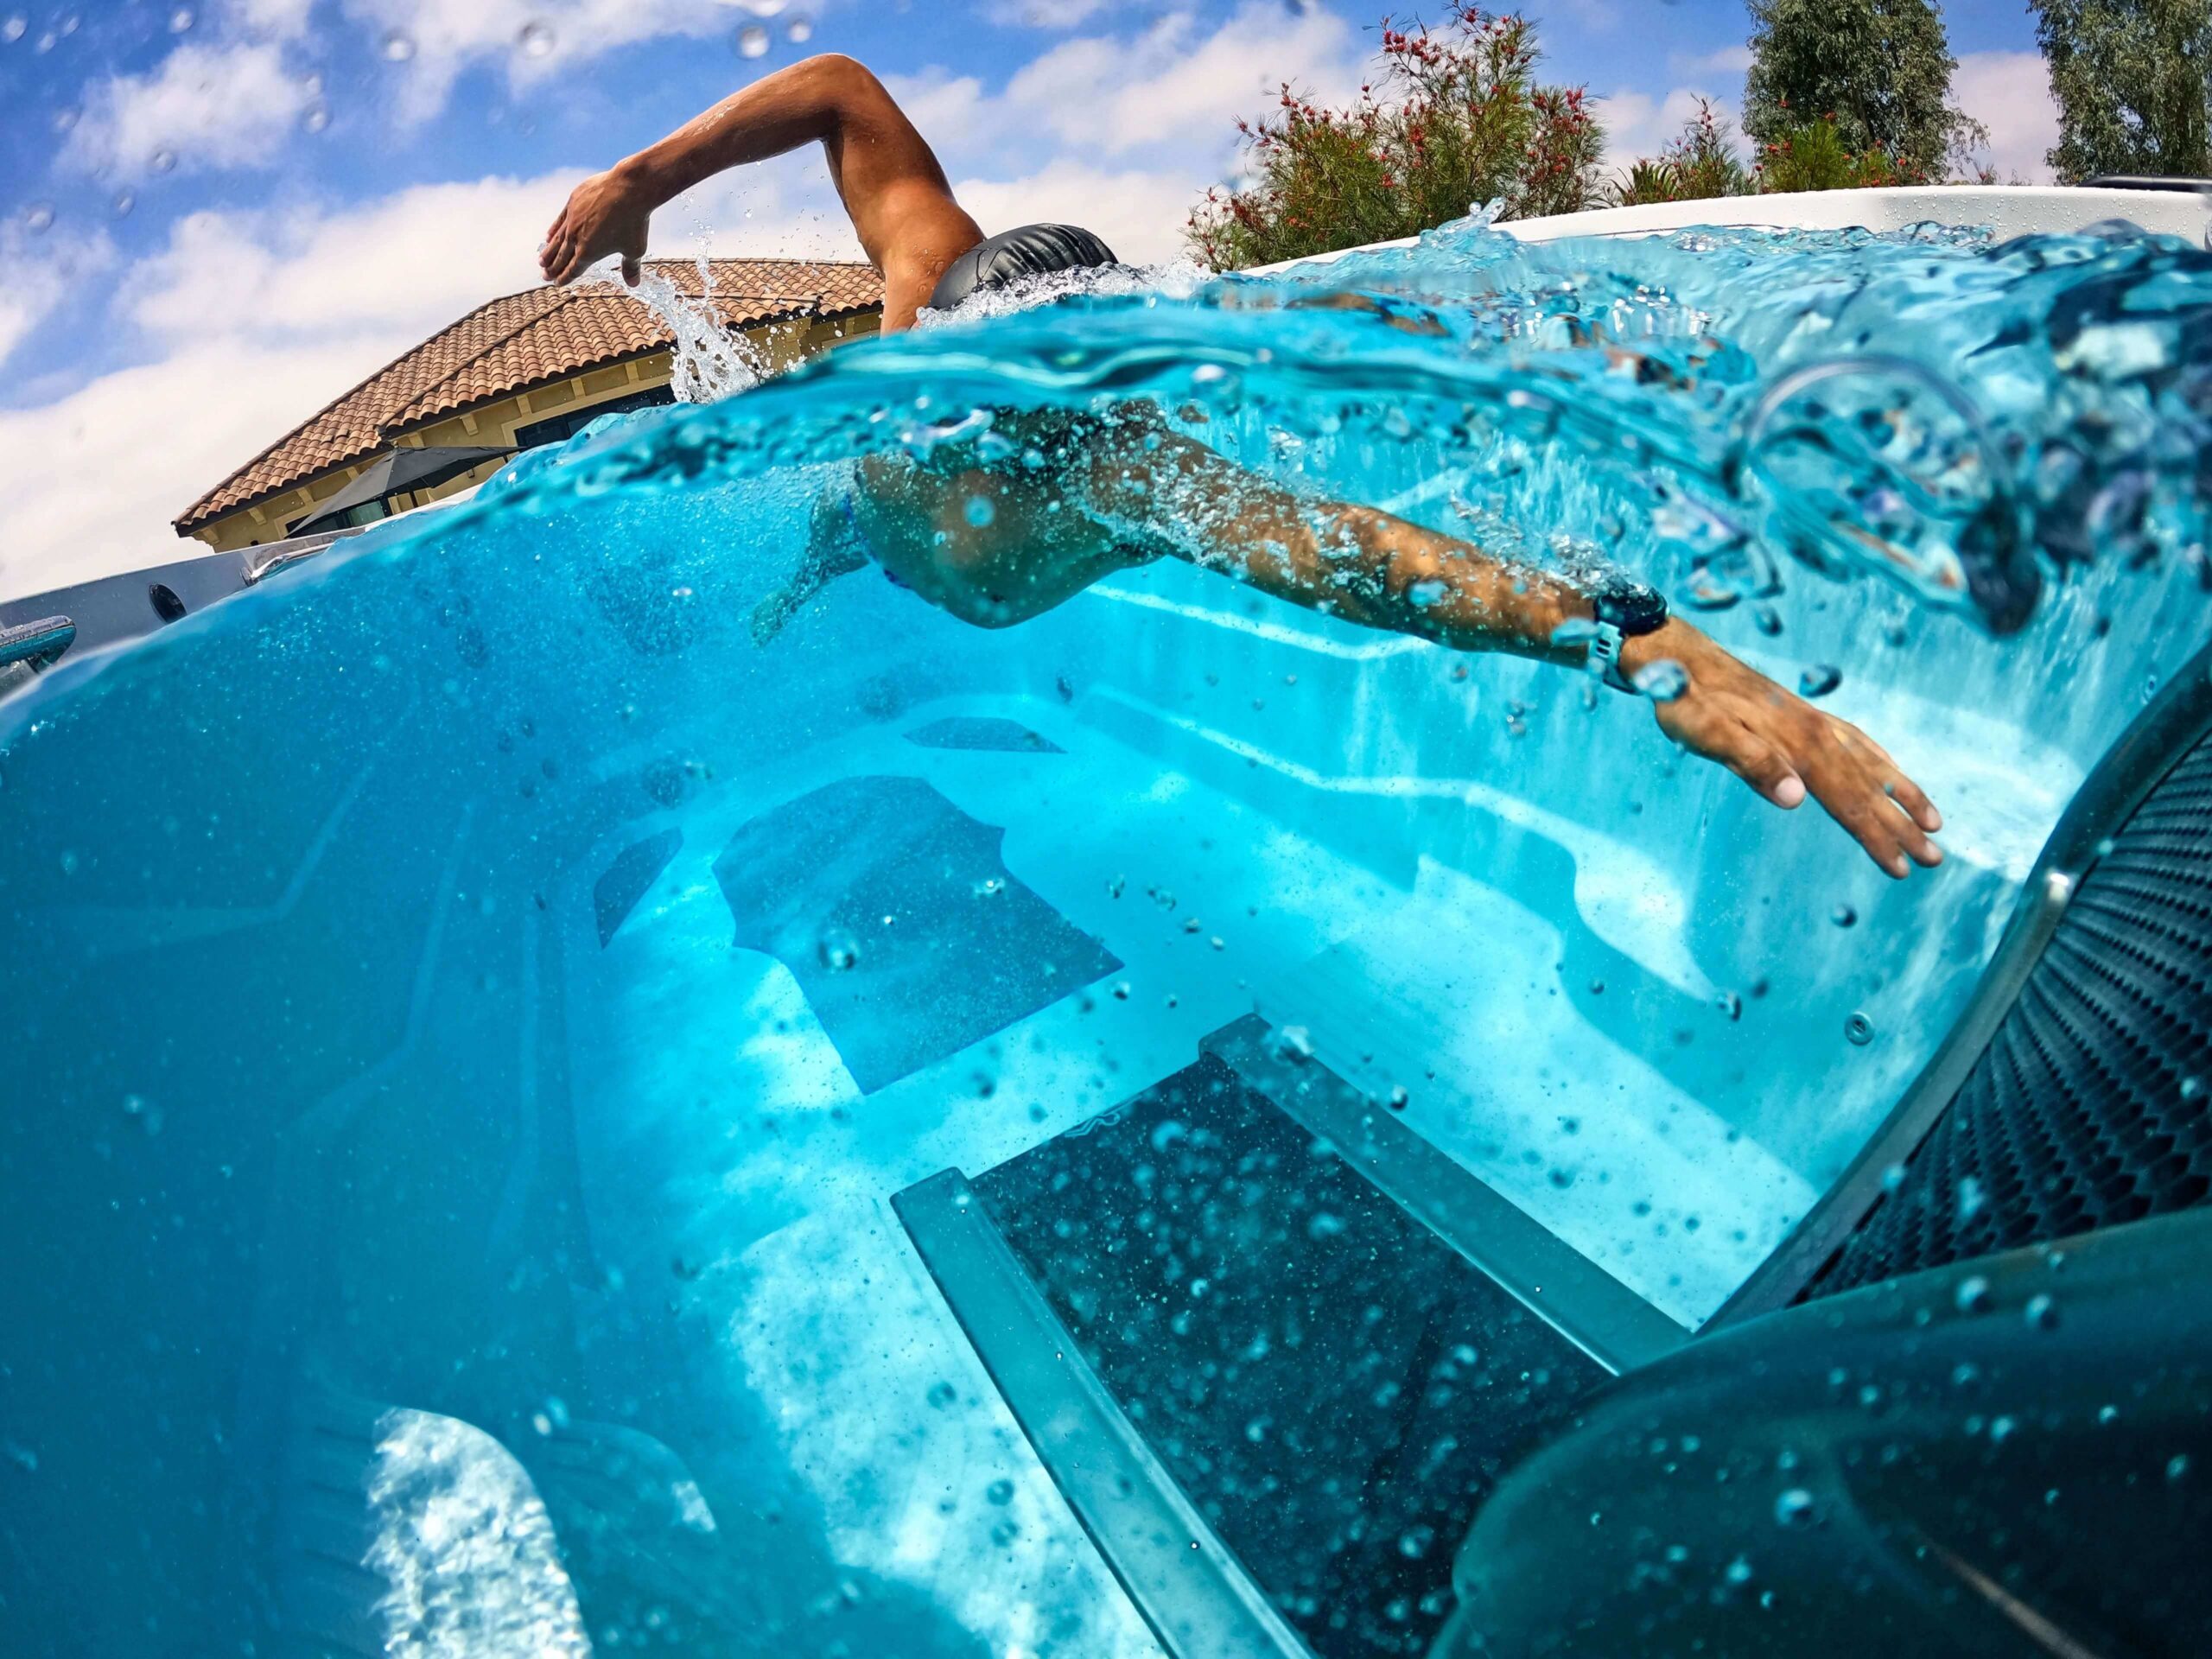 Top 5 Reasons Why Hot Tub & Swim Spa Ownership Improves Your Mental Health